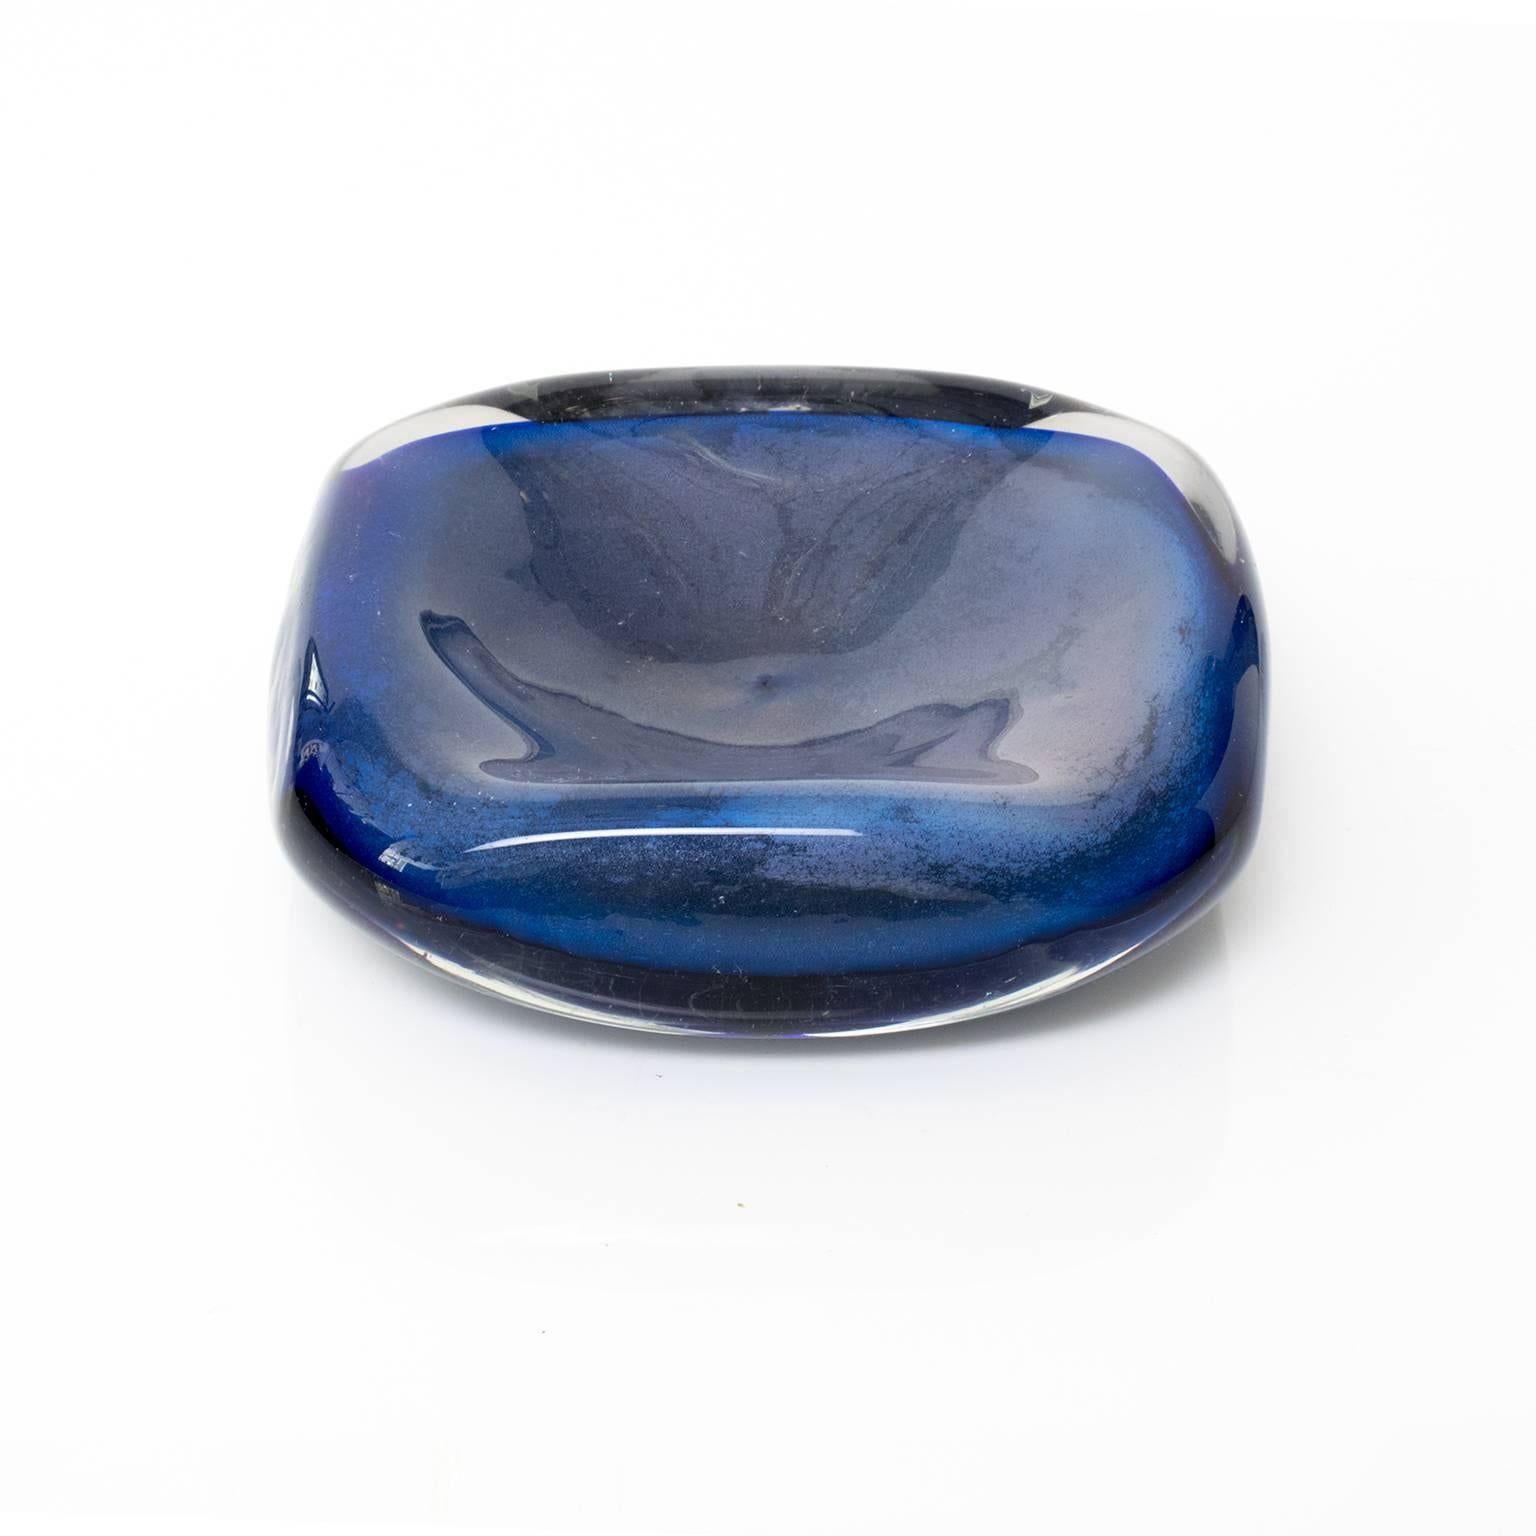 Small hand-forged blue glass bowl encased in a clear glass layer. Made in Sweden, circa 1960.
 
Measure: Height 2